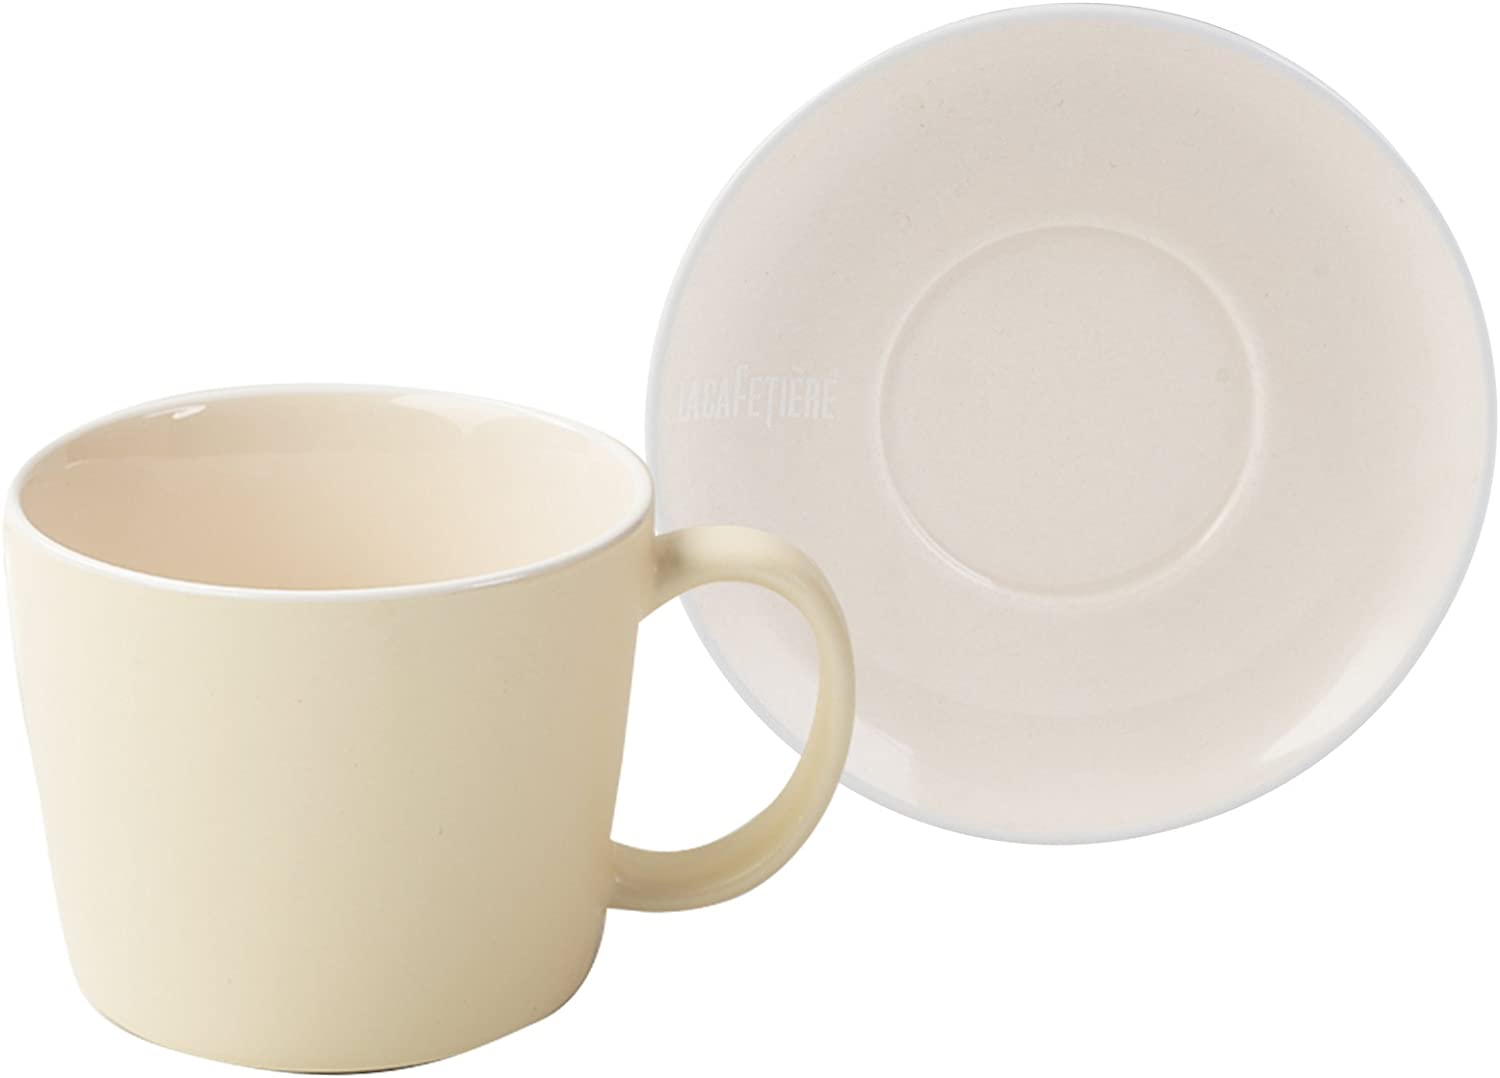 La Cafetiere Cream Cup and Saucer, Set of 2, Beige